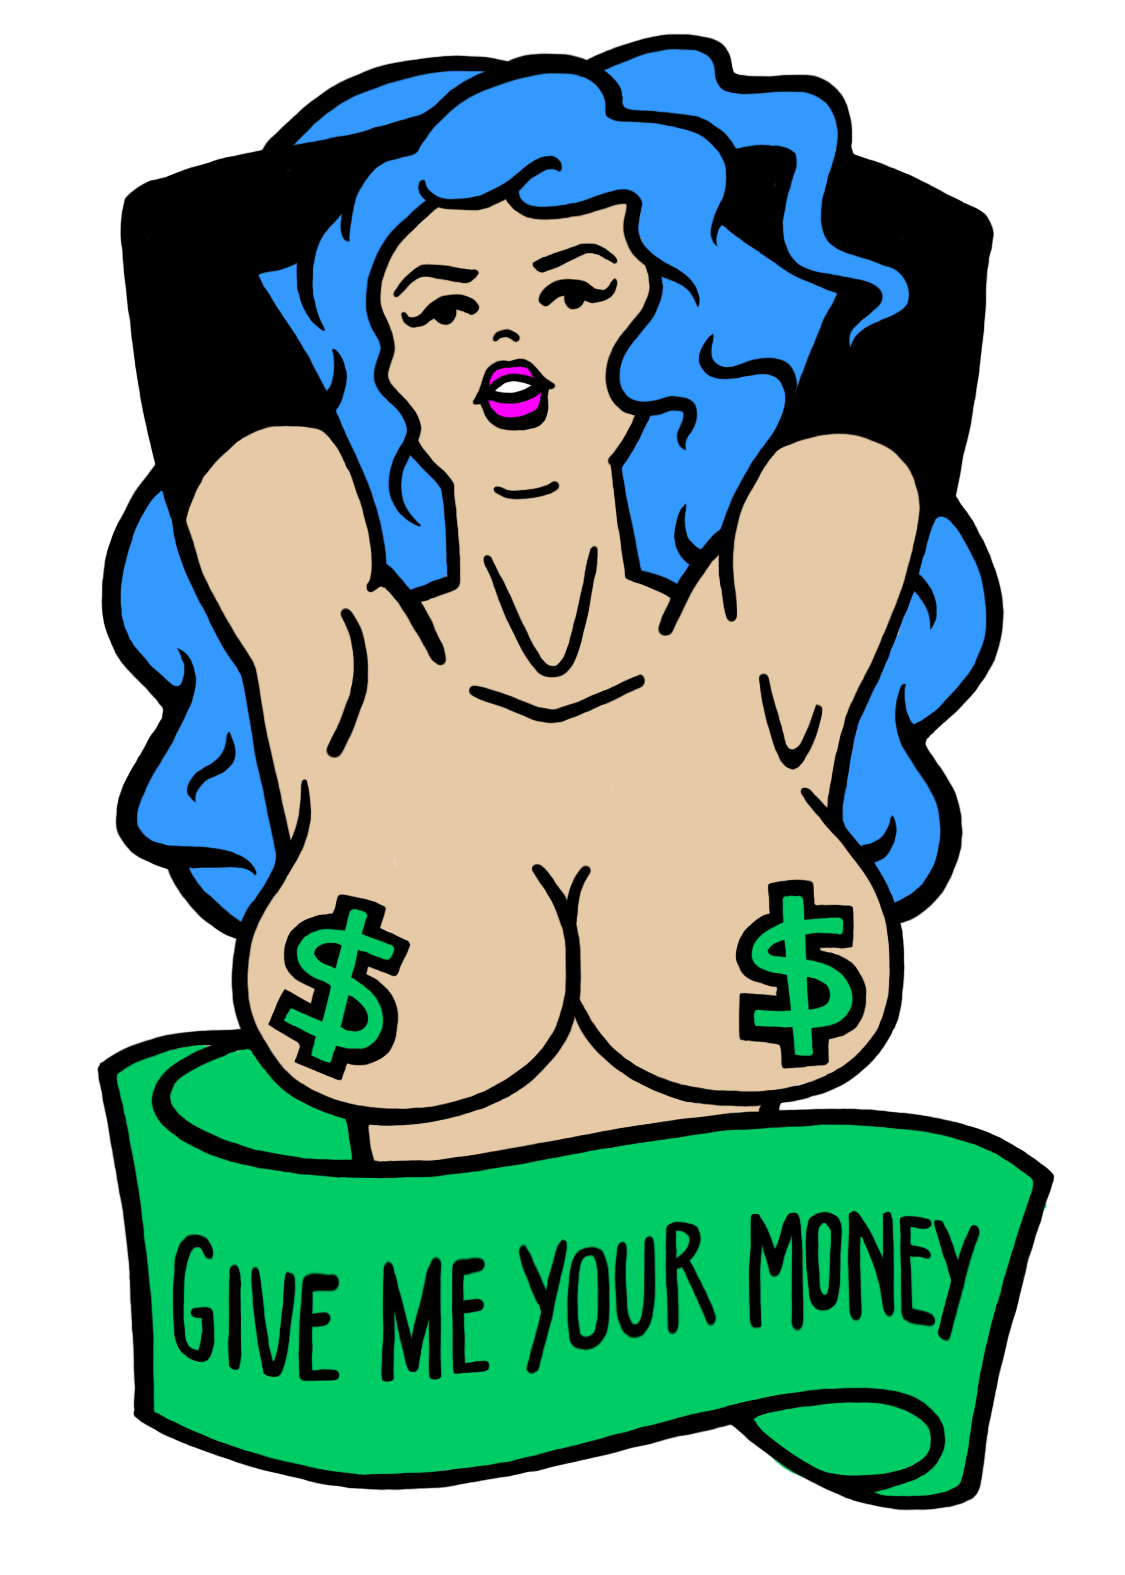 A matte vinyl sticker featuring the bust of a topless, blue haired woman wearing green dollar sign pasties. Below her is a banner that says "GIVE ME YOUR MONEY".